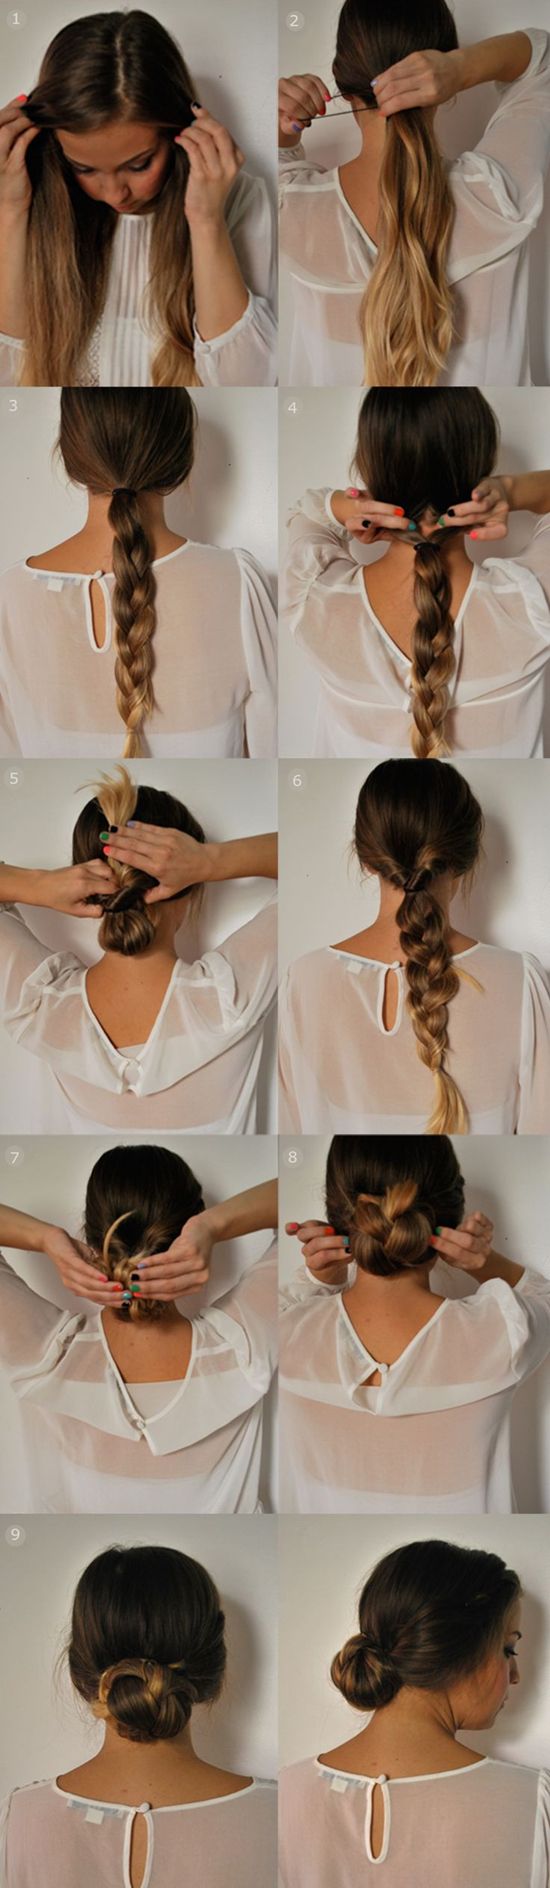 Last-minute hairstyles for a night out you can do in 5 mins